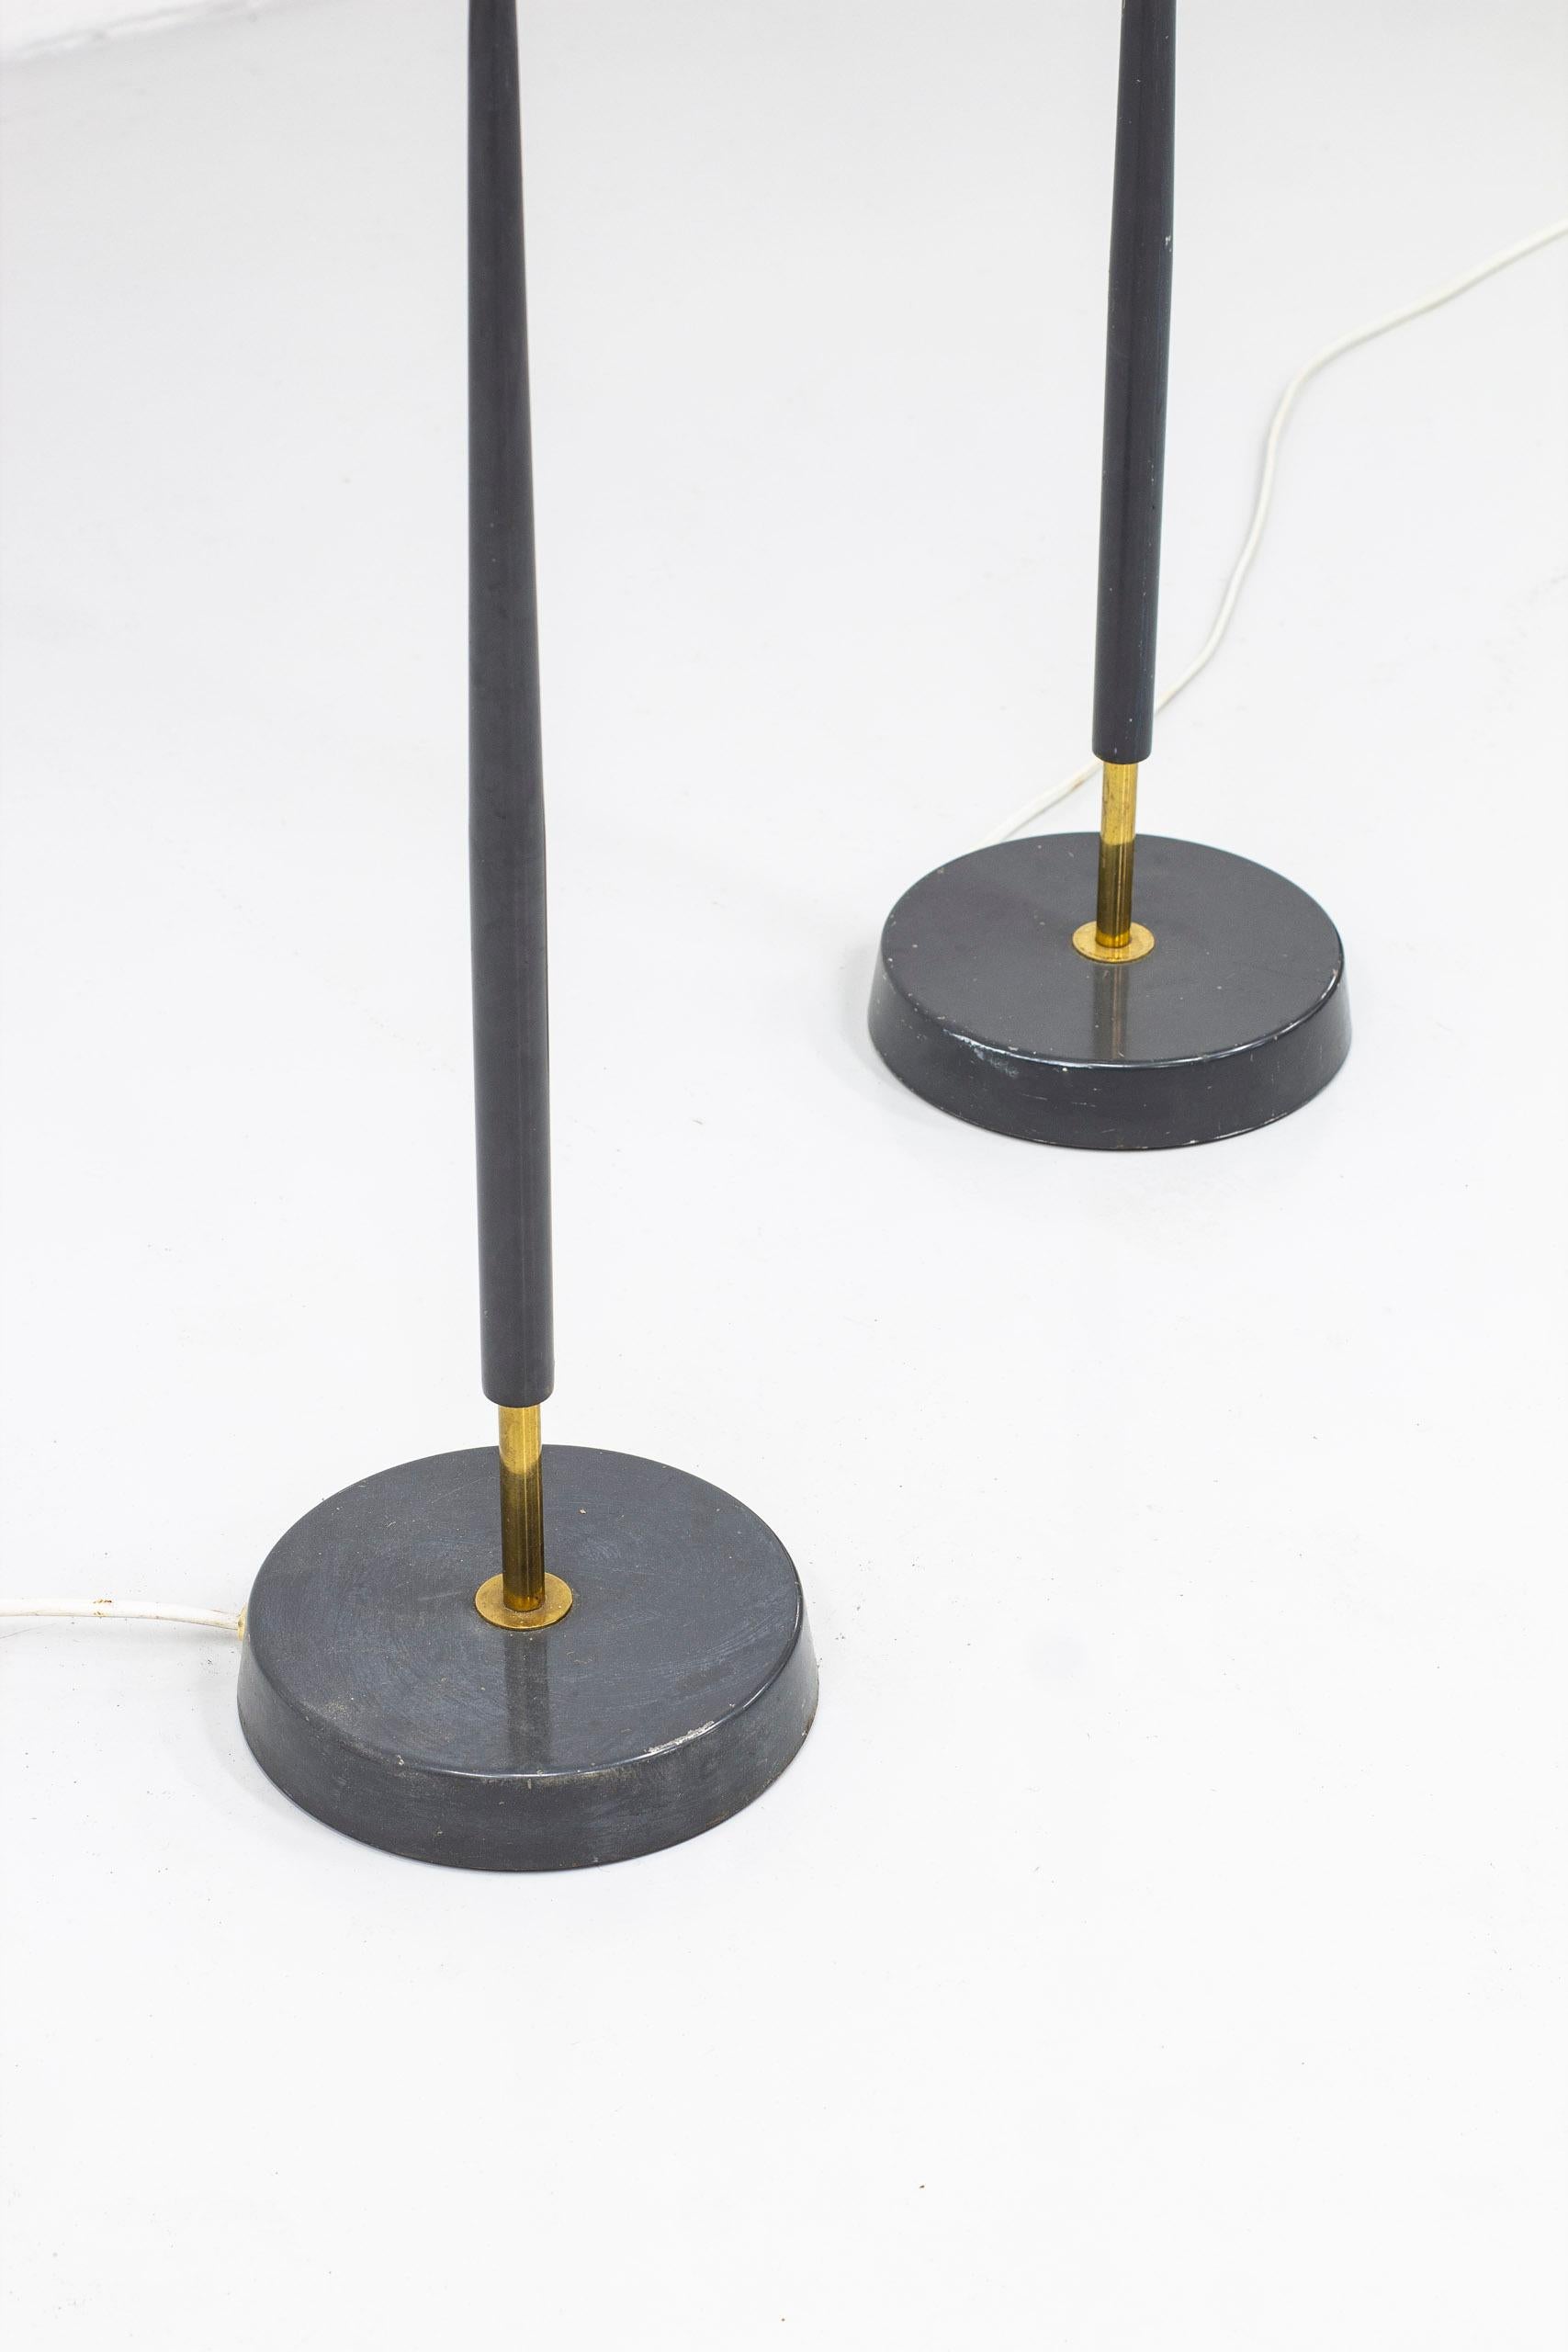 Mid-20th Century Floor Lamps by ASEA Belysning, Sweden, 1950s For Sale